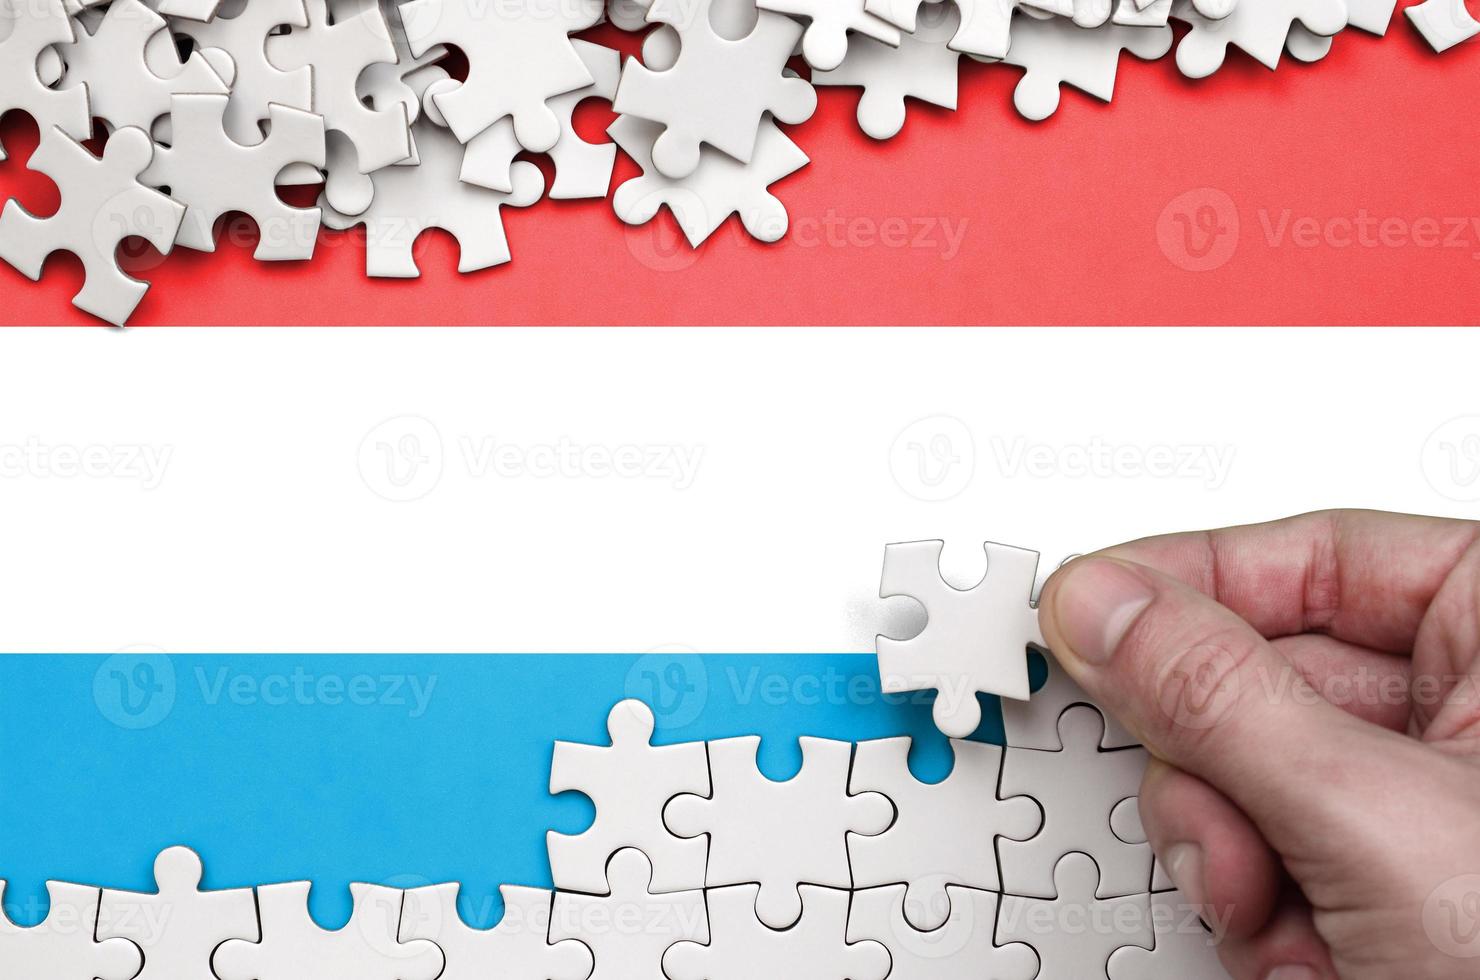 Luxembourg flag is depicted on a table on which the human hand folds a puzzle of white color photo